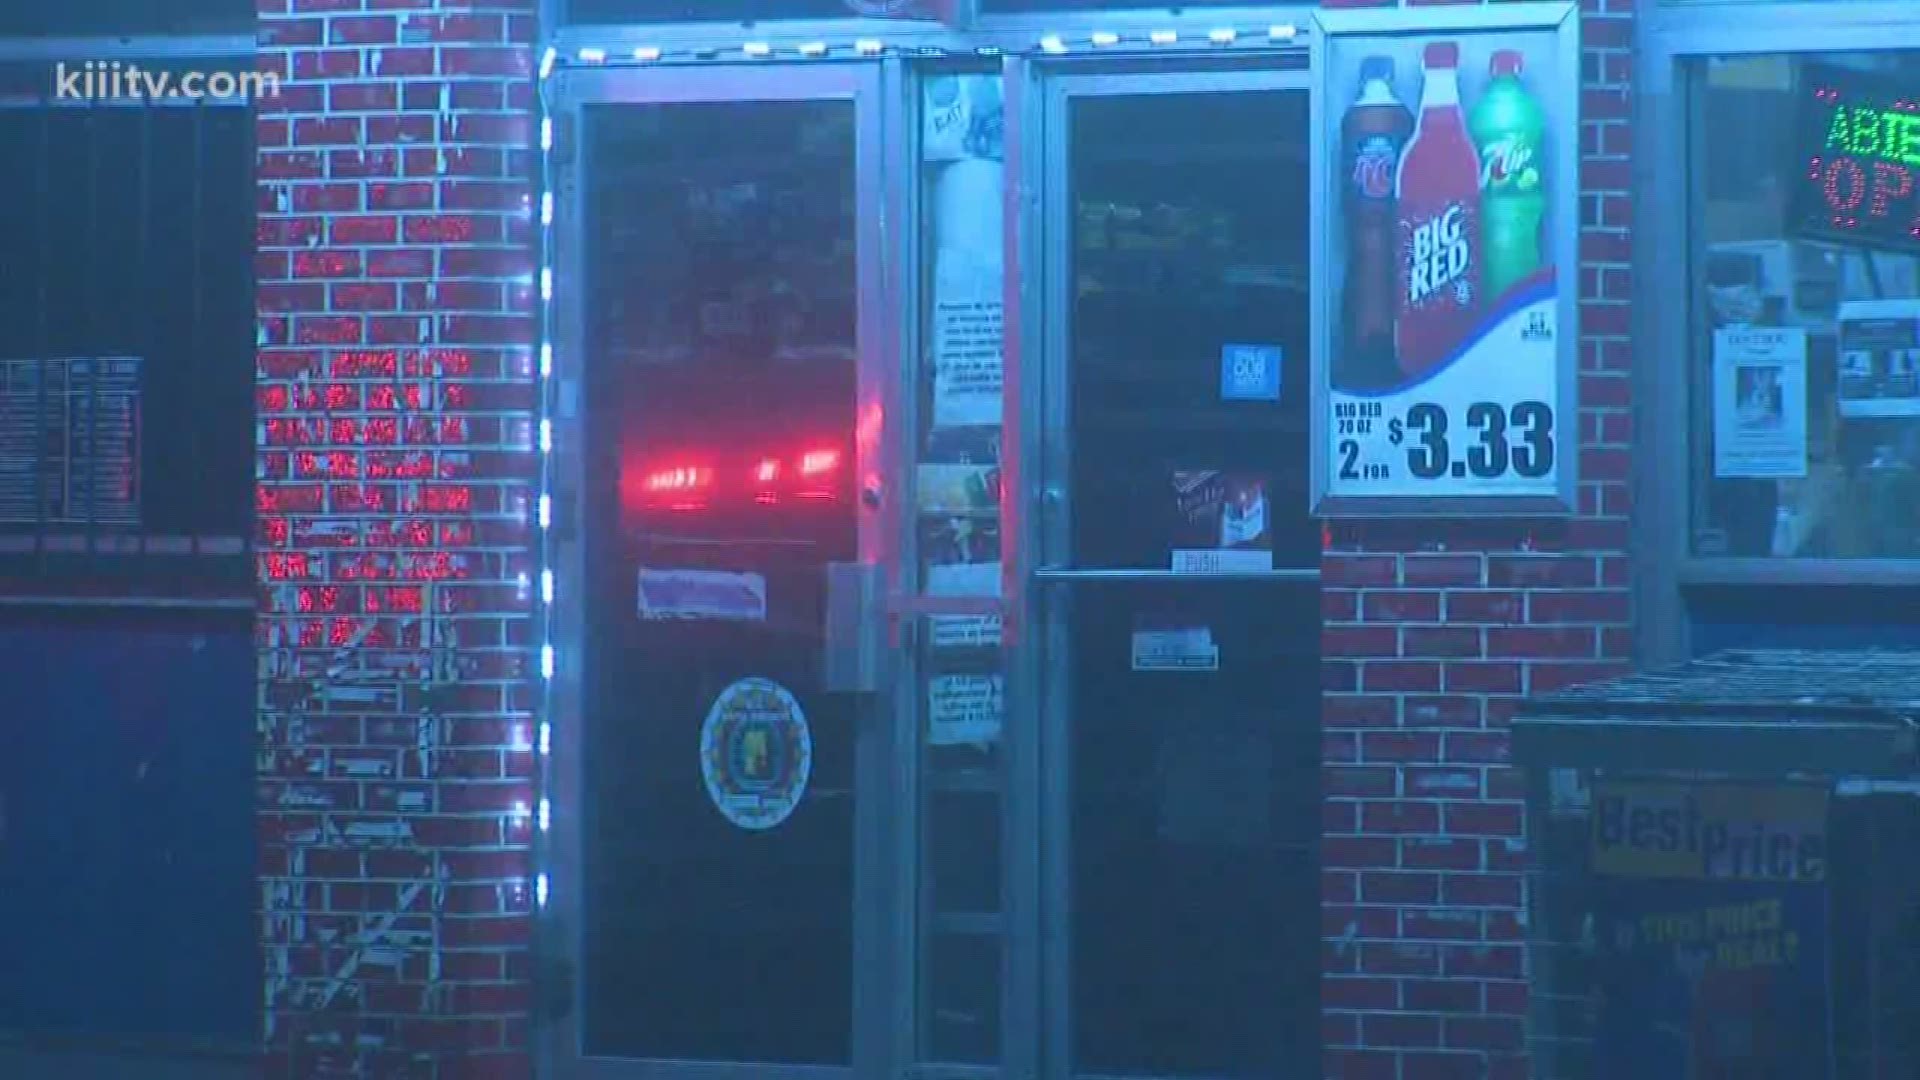 A shooting in Corpus Christi overnight has left a man dead.  Corpus Christi police say the shooting happened just after midnight outside the One Stop Market on Ayers Street near Mansheim Blvd.  According to officers, the 28 year old victim got into a disturbance with the suspect in the parking lot.